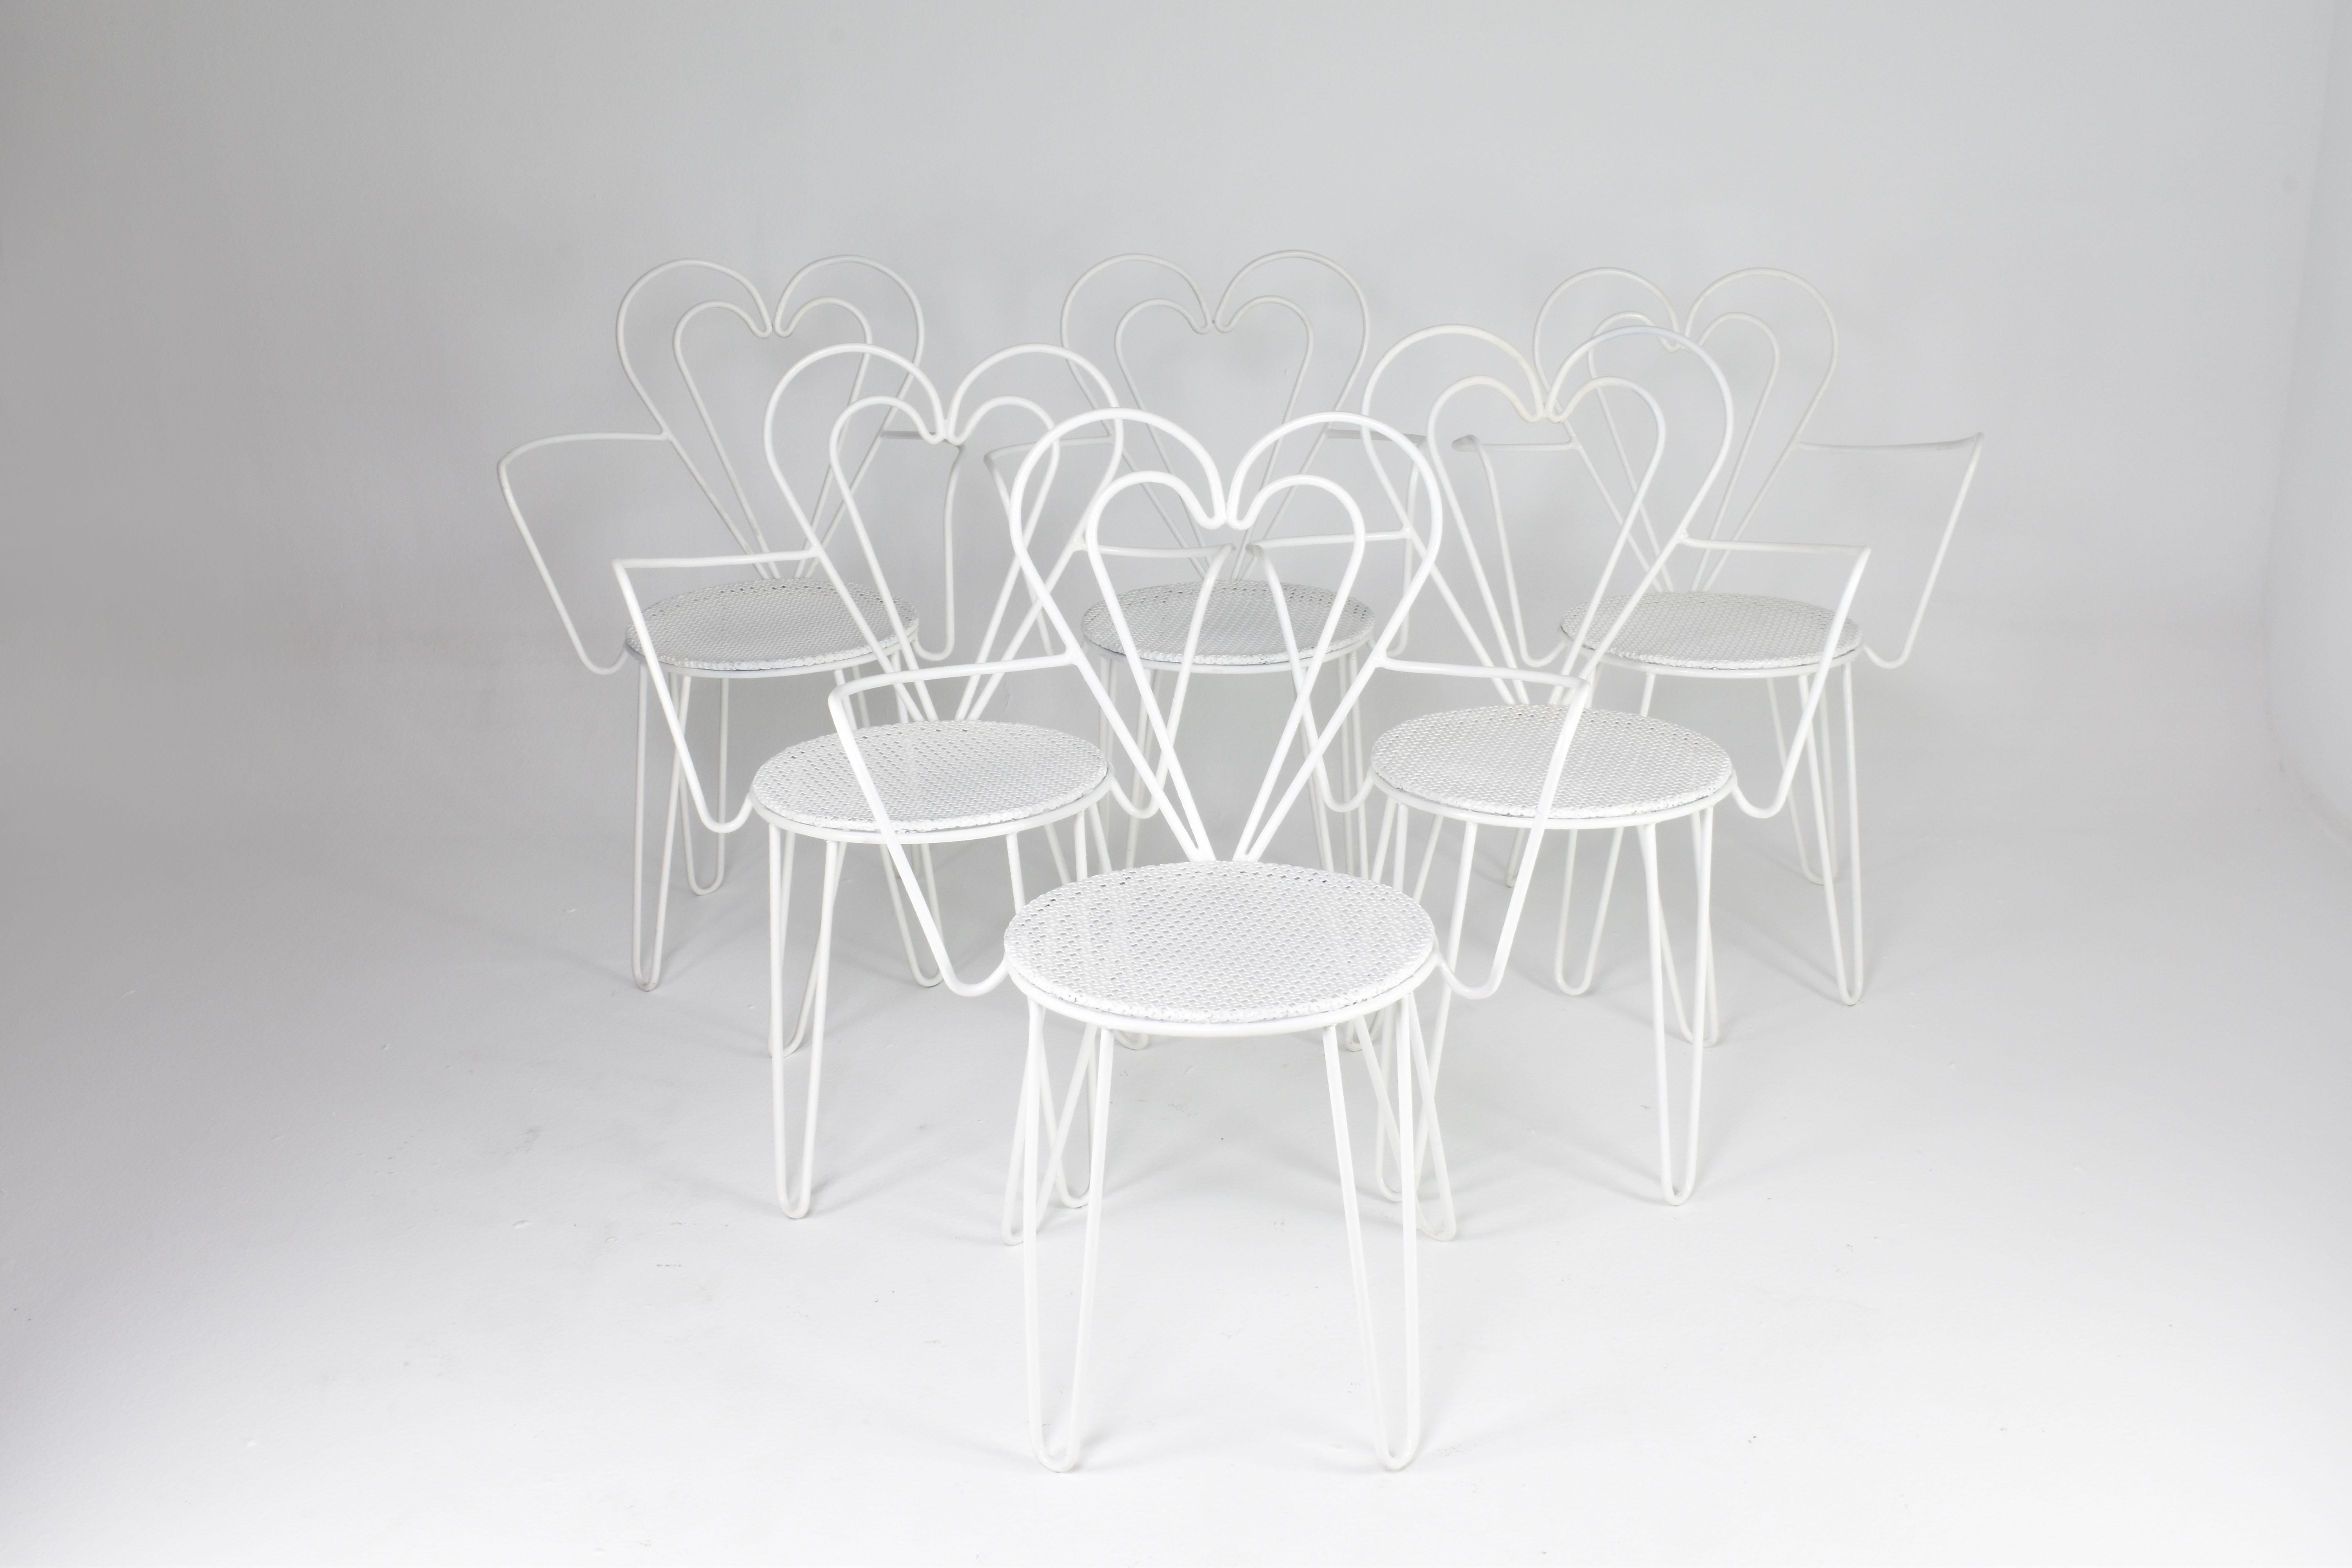 A set of six iconic chairs designed by the renowned Mathieu Matégot. These chairs are characterized by heart-shaped tubular steel frames, the famous perforated seat, and elegantly curved armrests. 

Mathieu Matégot, a prominent figure in mid-century